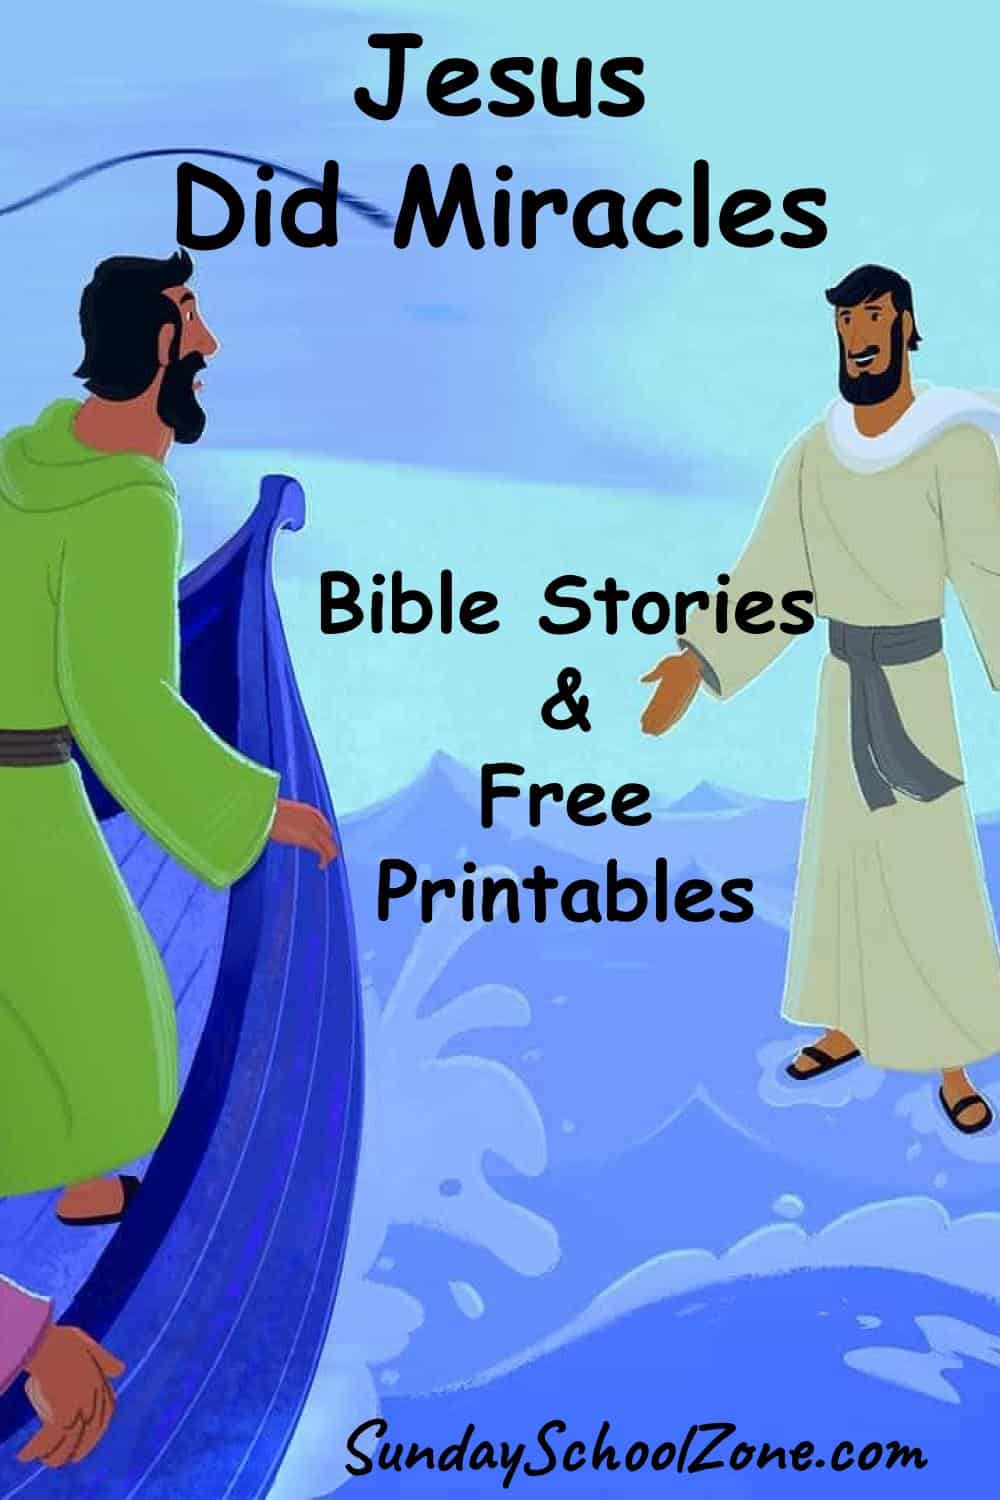 miracles true stories of how god acts today